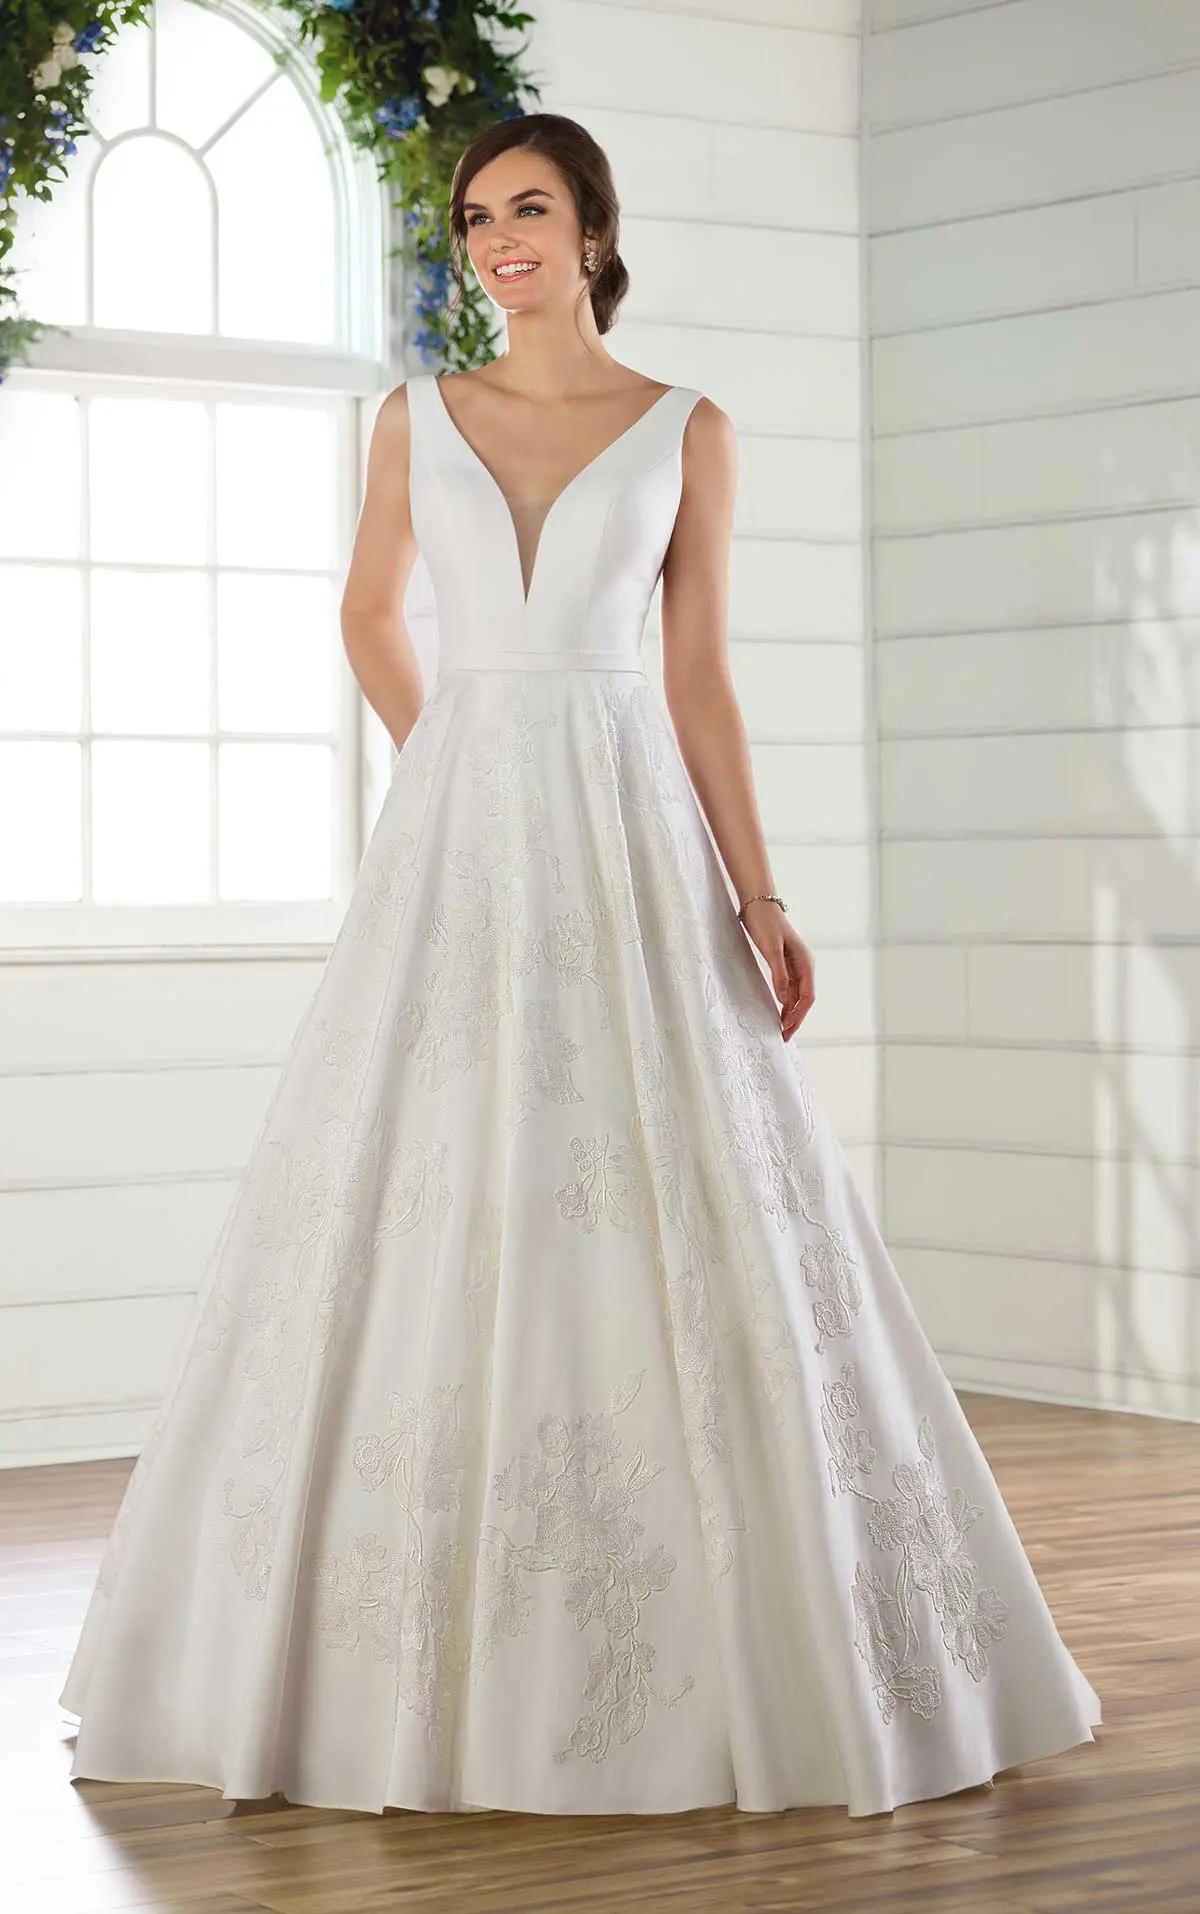 Wedding Gown Consignment